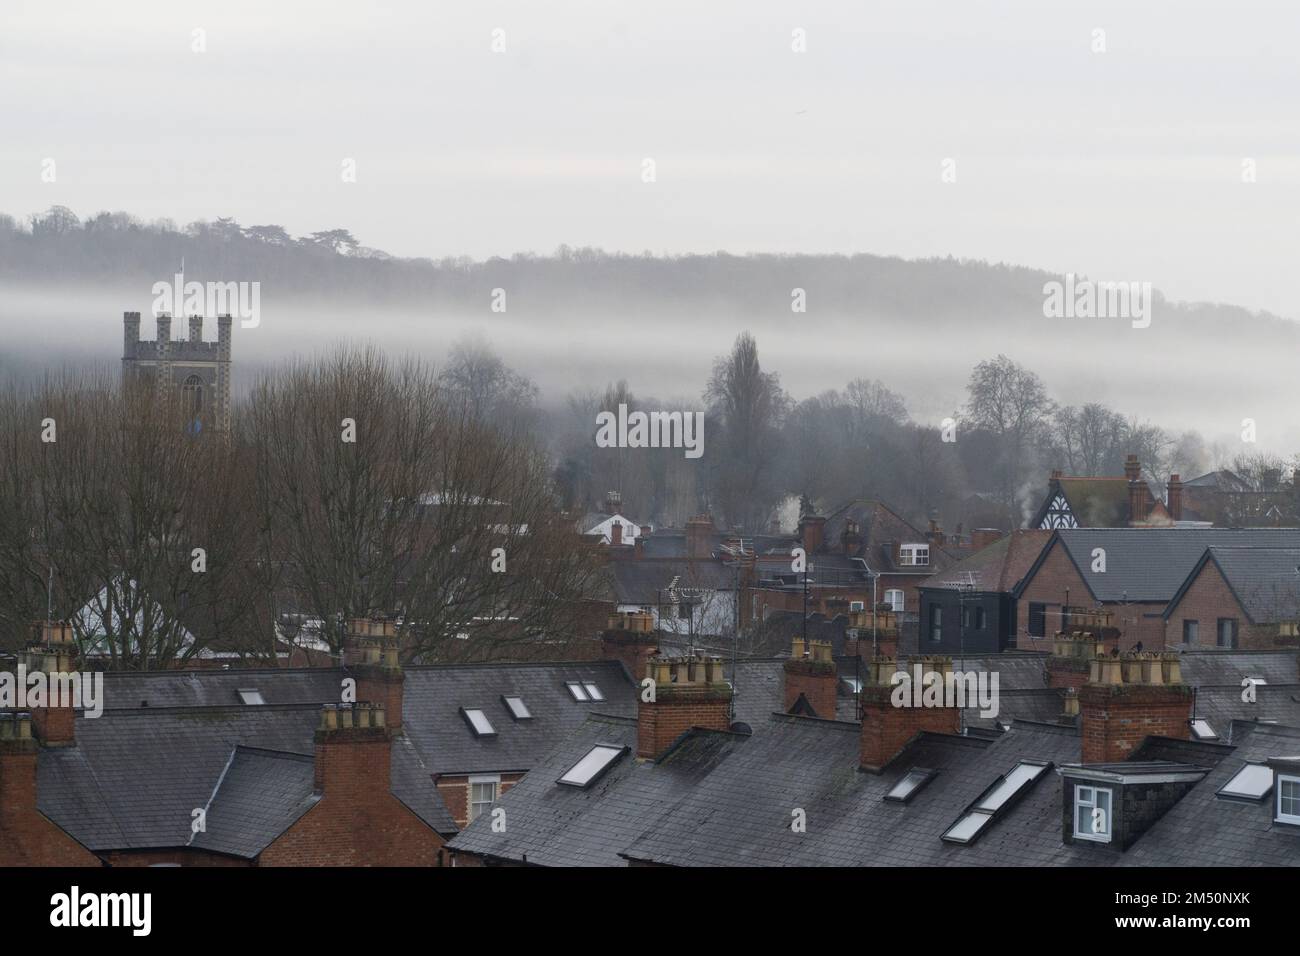 UK Weather, 24 December 2022: On Christmas Eve in Henley-on-Thames early morning fog from the river rises above the town's rooftops and the square tower of St Mary's church. With the weather turning mild and wet in England there will not be a white Christmas this year. Anna Watson/Alamy Live News Stock Photo